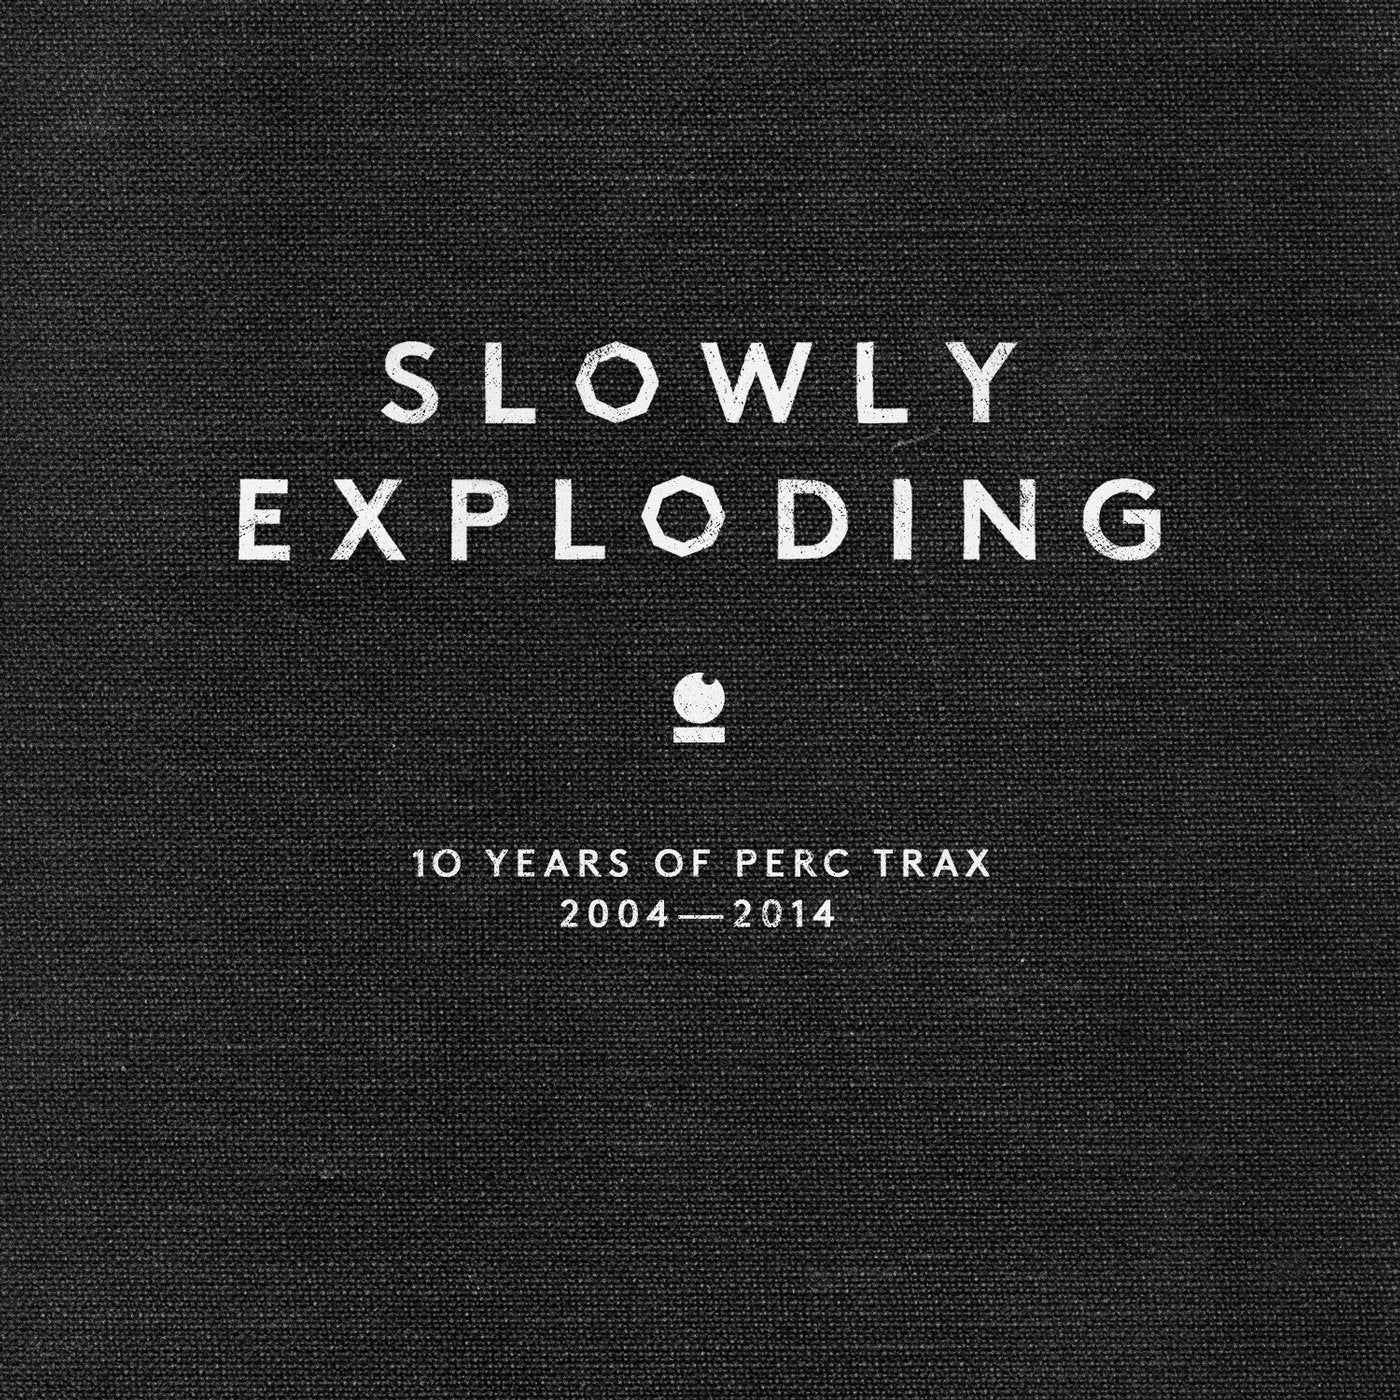 Slowly Exploding - 10 Years Of Perc Trax